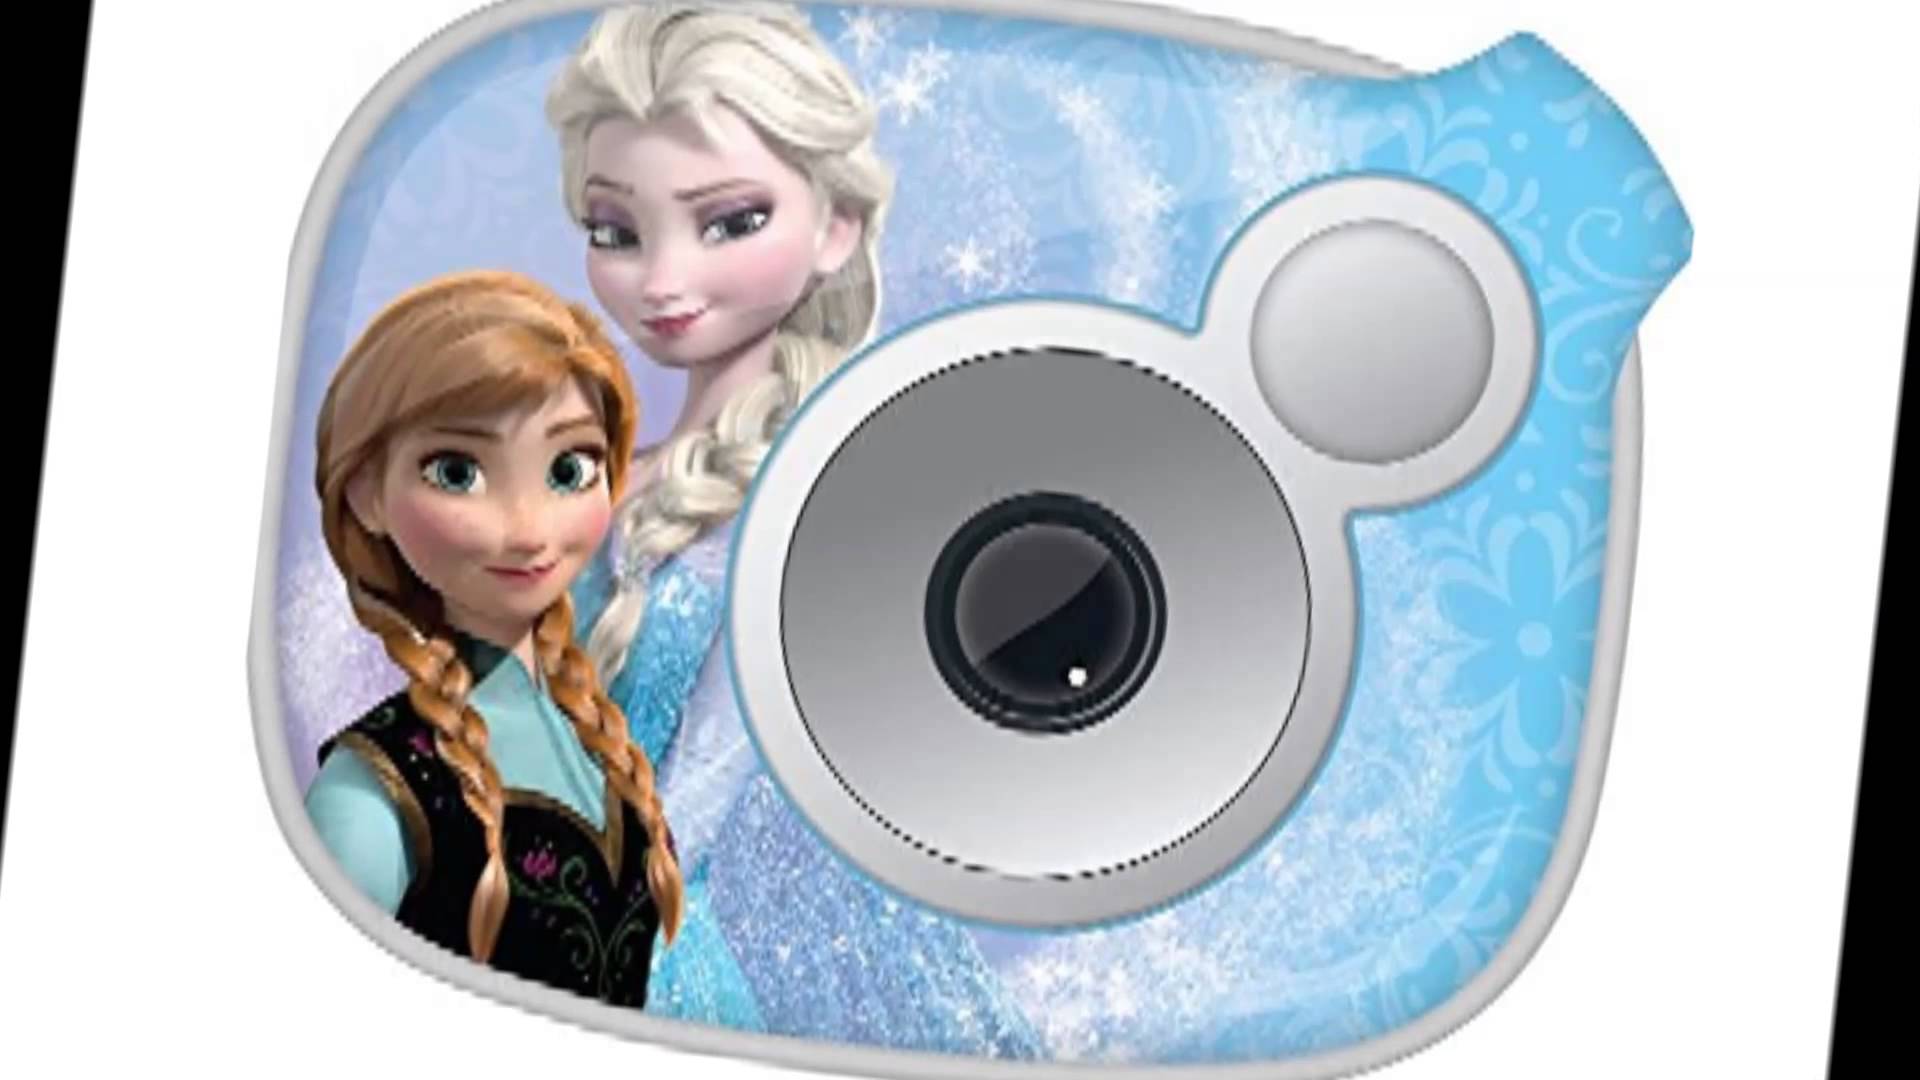 Disney’s Frozen Snap n’ Share Digital Camera with 1-Inch LCD Screen Review